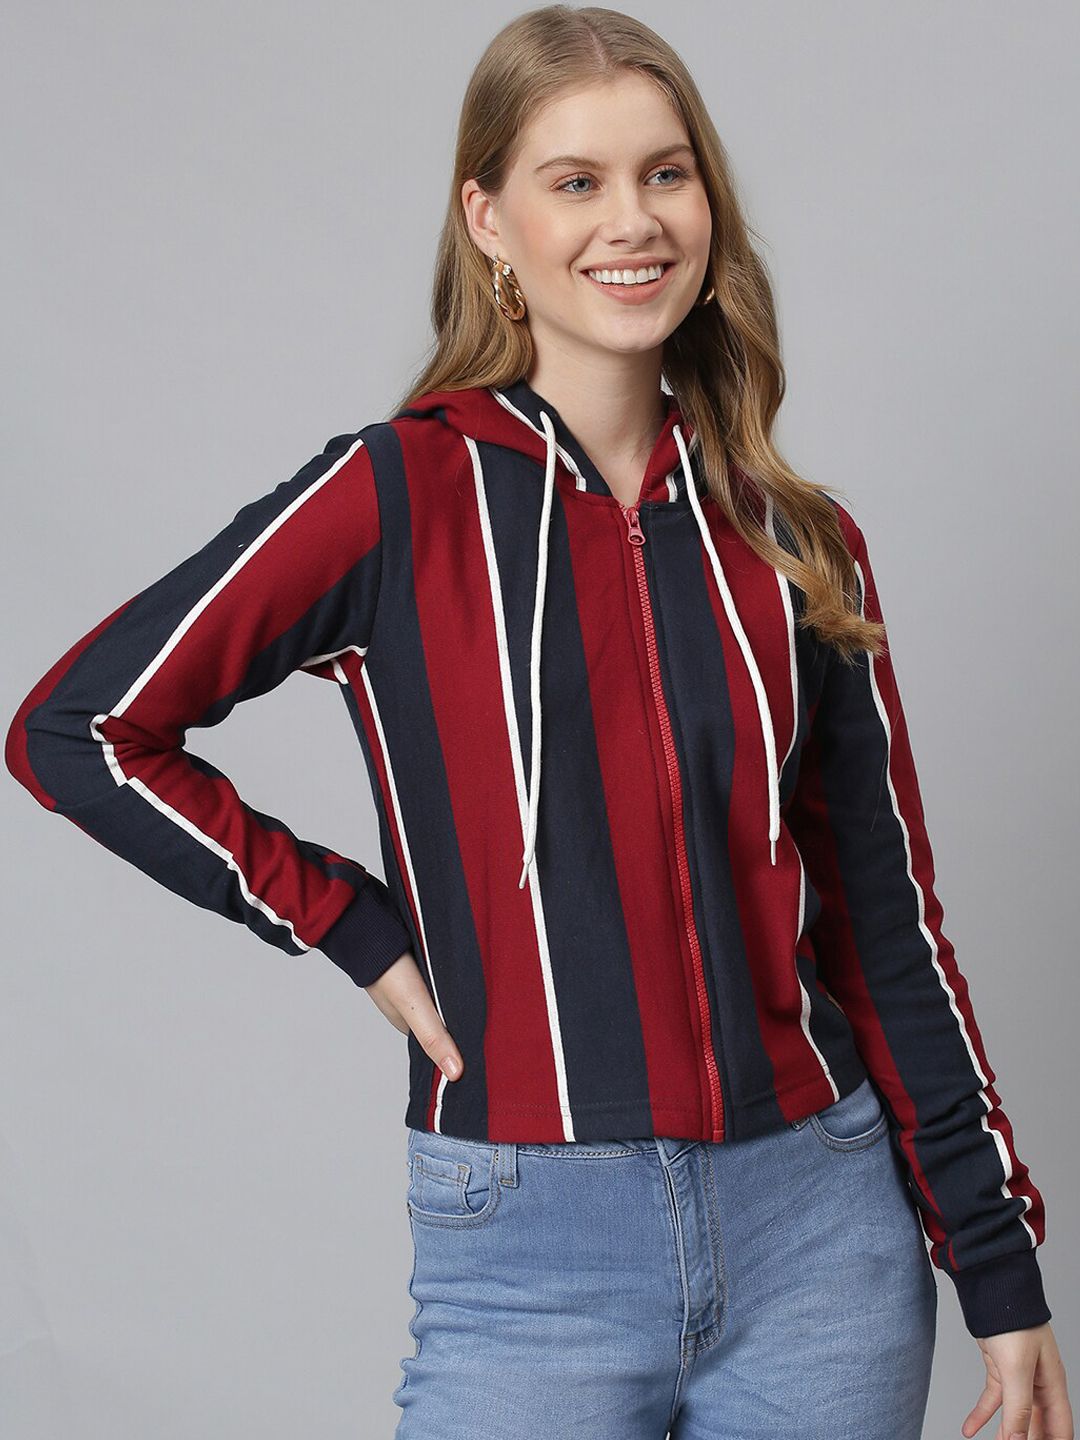 Campus Sutra Women Maroon Striped Hooded Sweatshirt Price in India